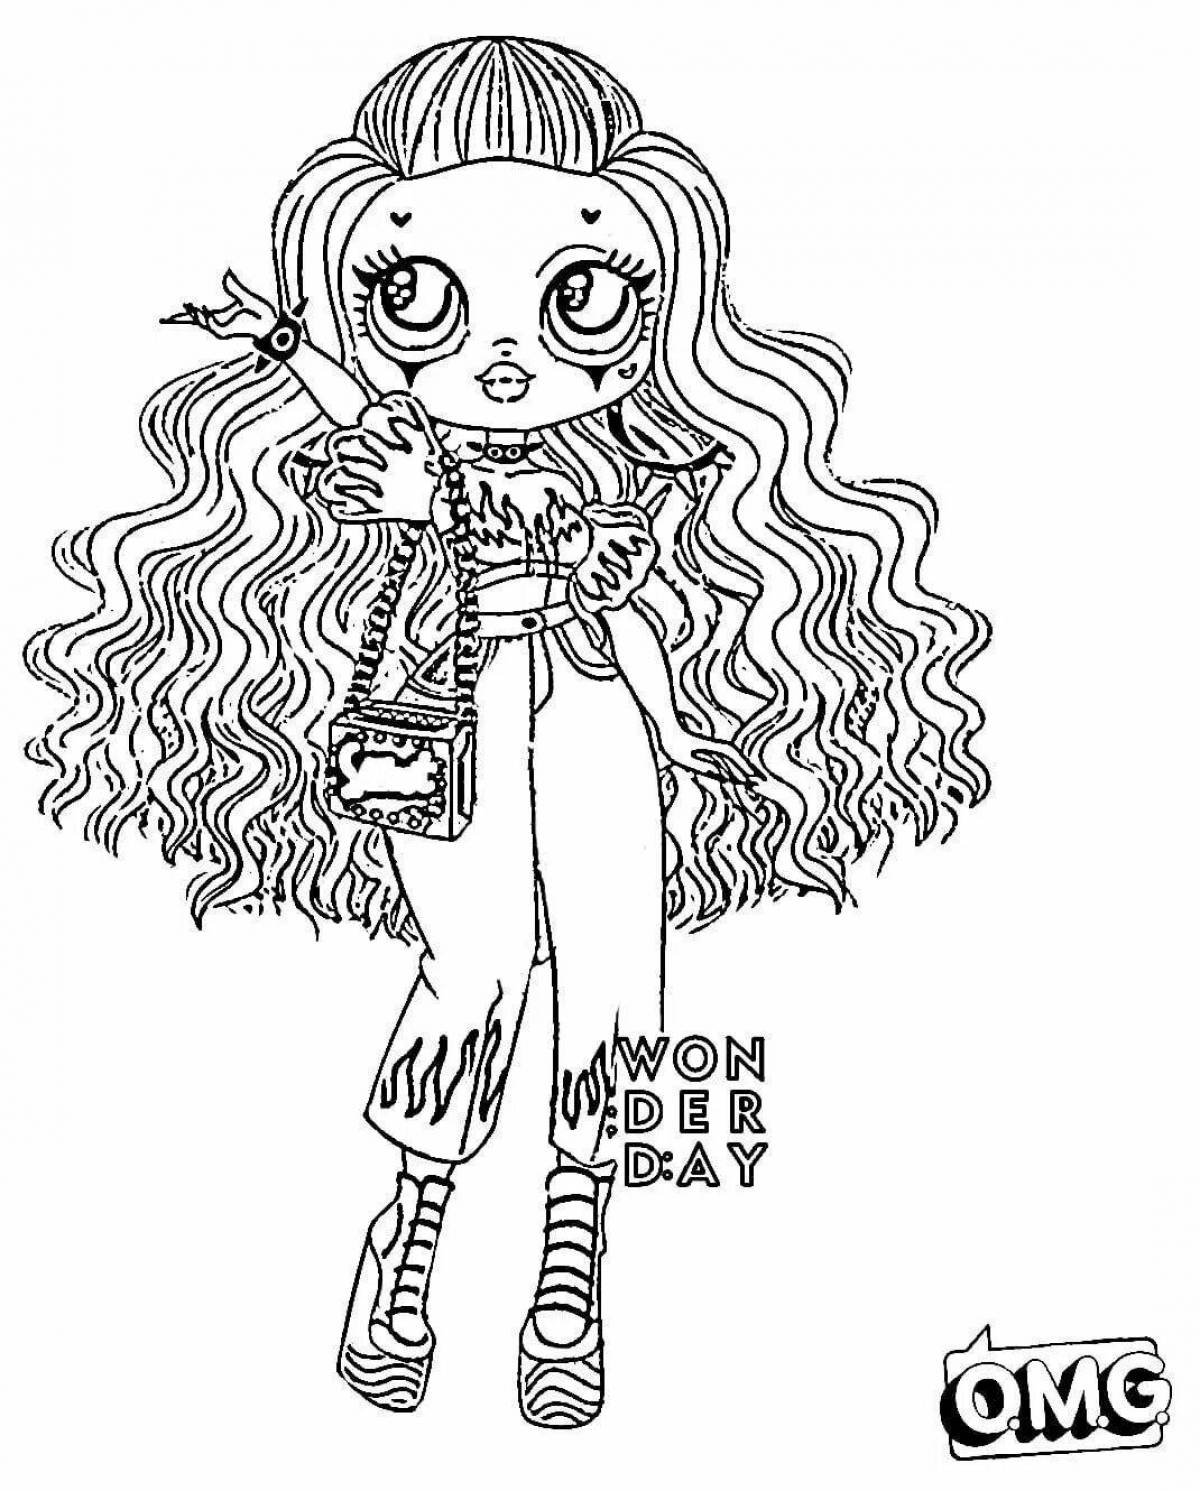 Cute omg dolls coloring pages